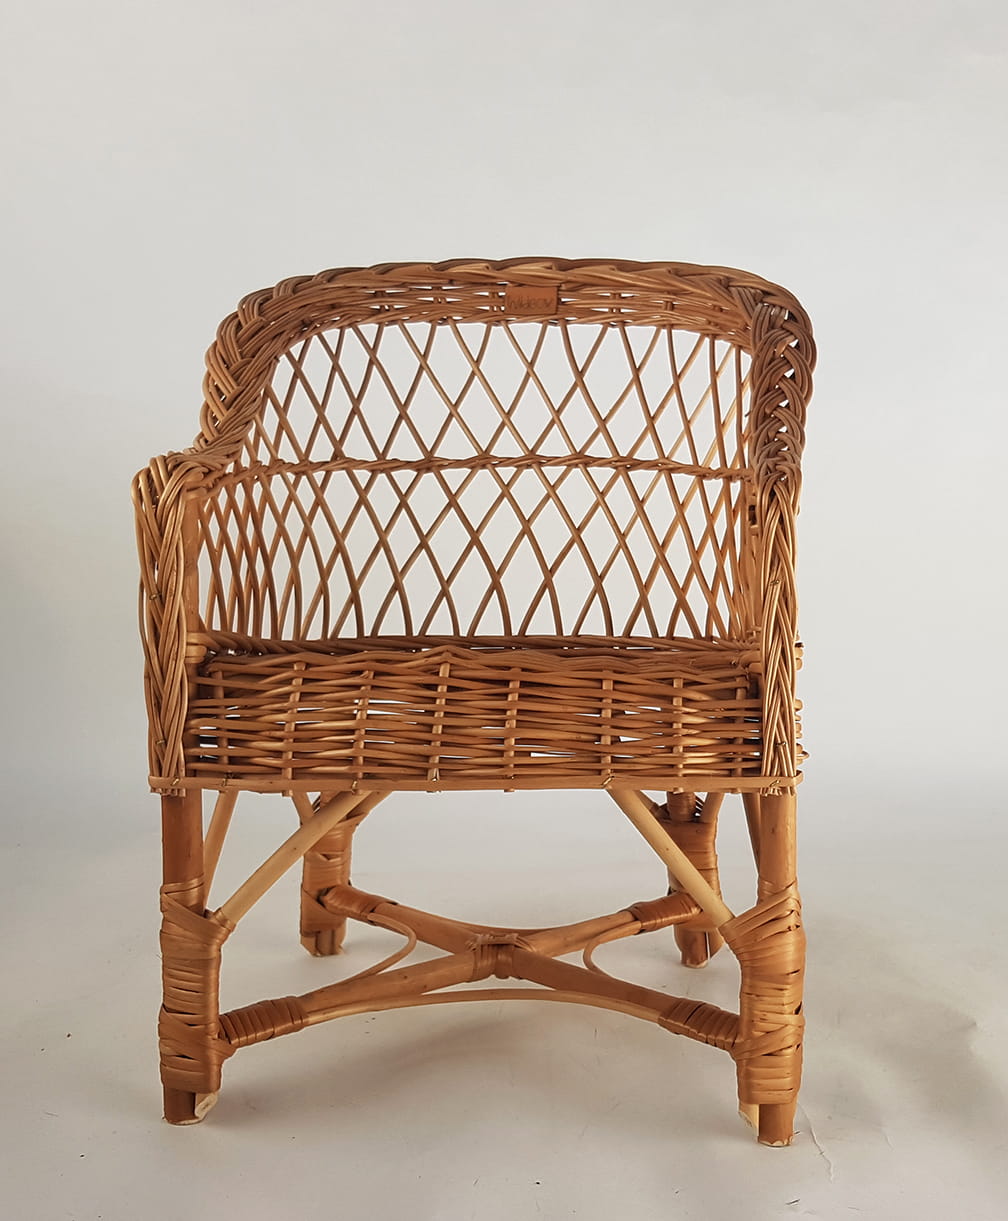 NATURAL WICKER CHAIR FOR CHILDREN